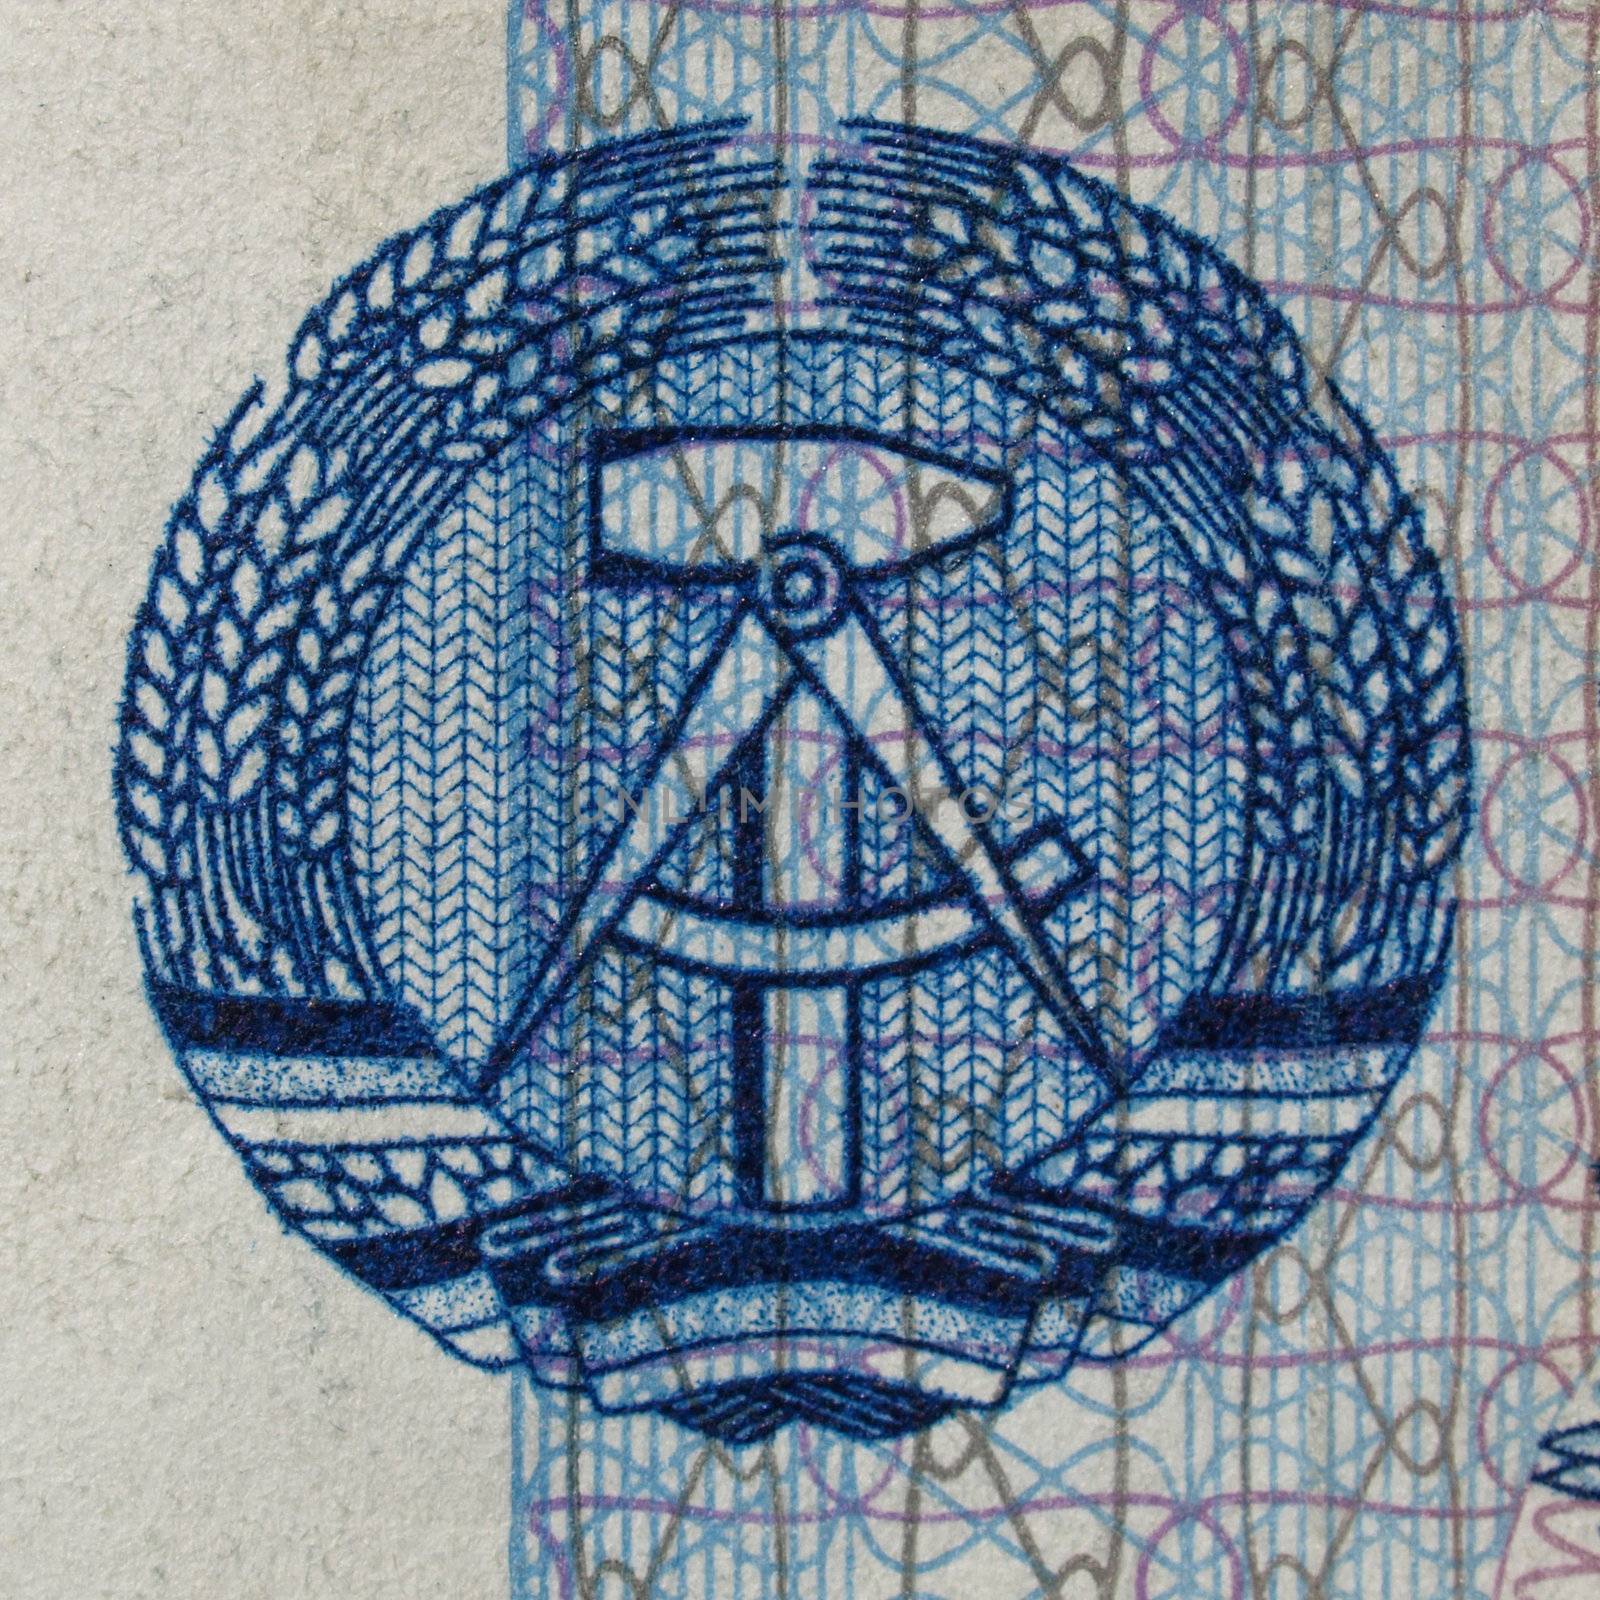 DDR symbol on a 100 Mark banknote from East Germany  - Note: no more in use since german reunification in 1989